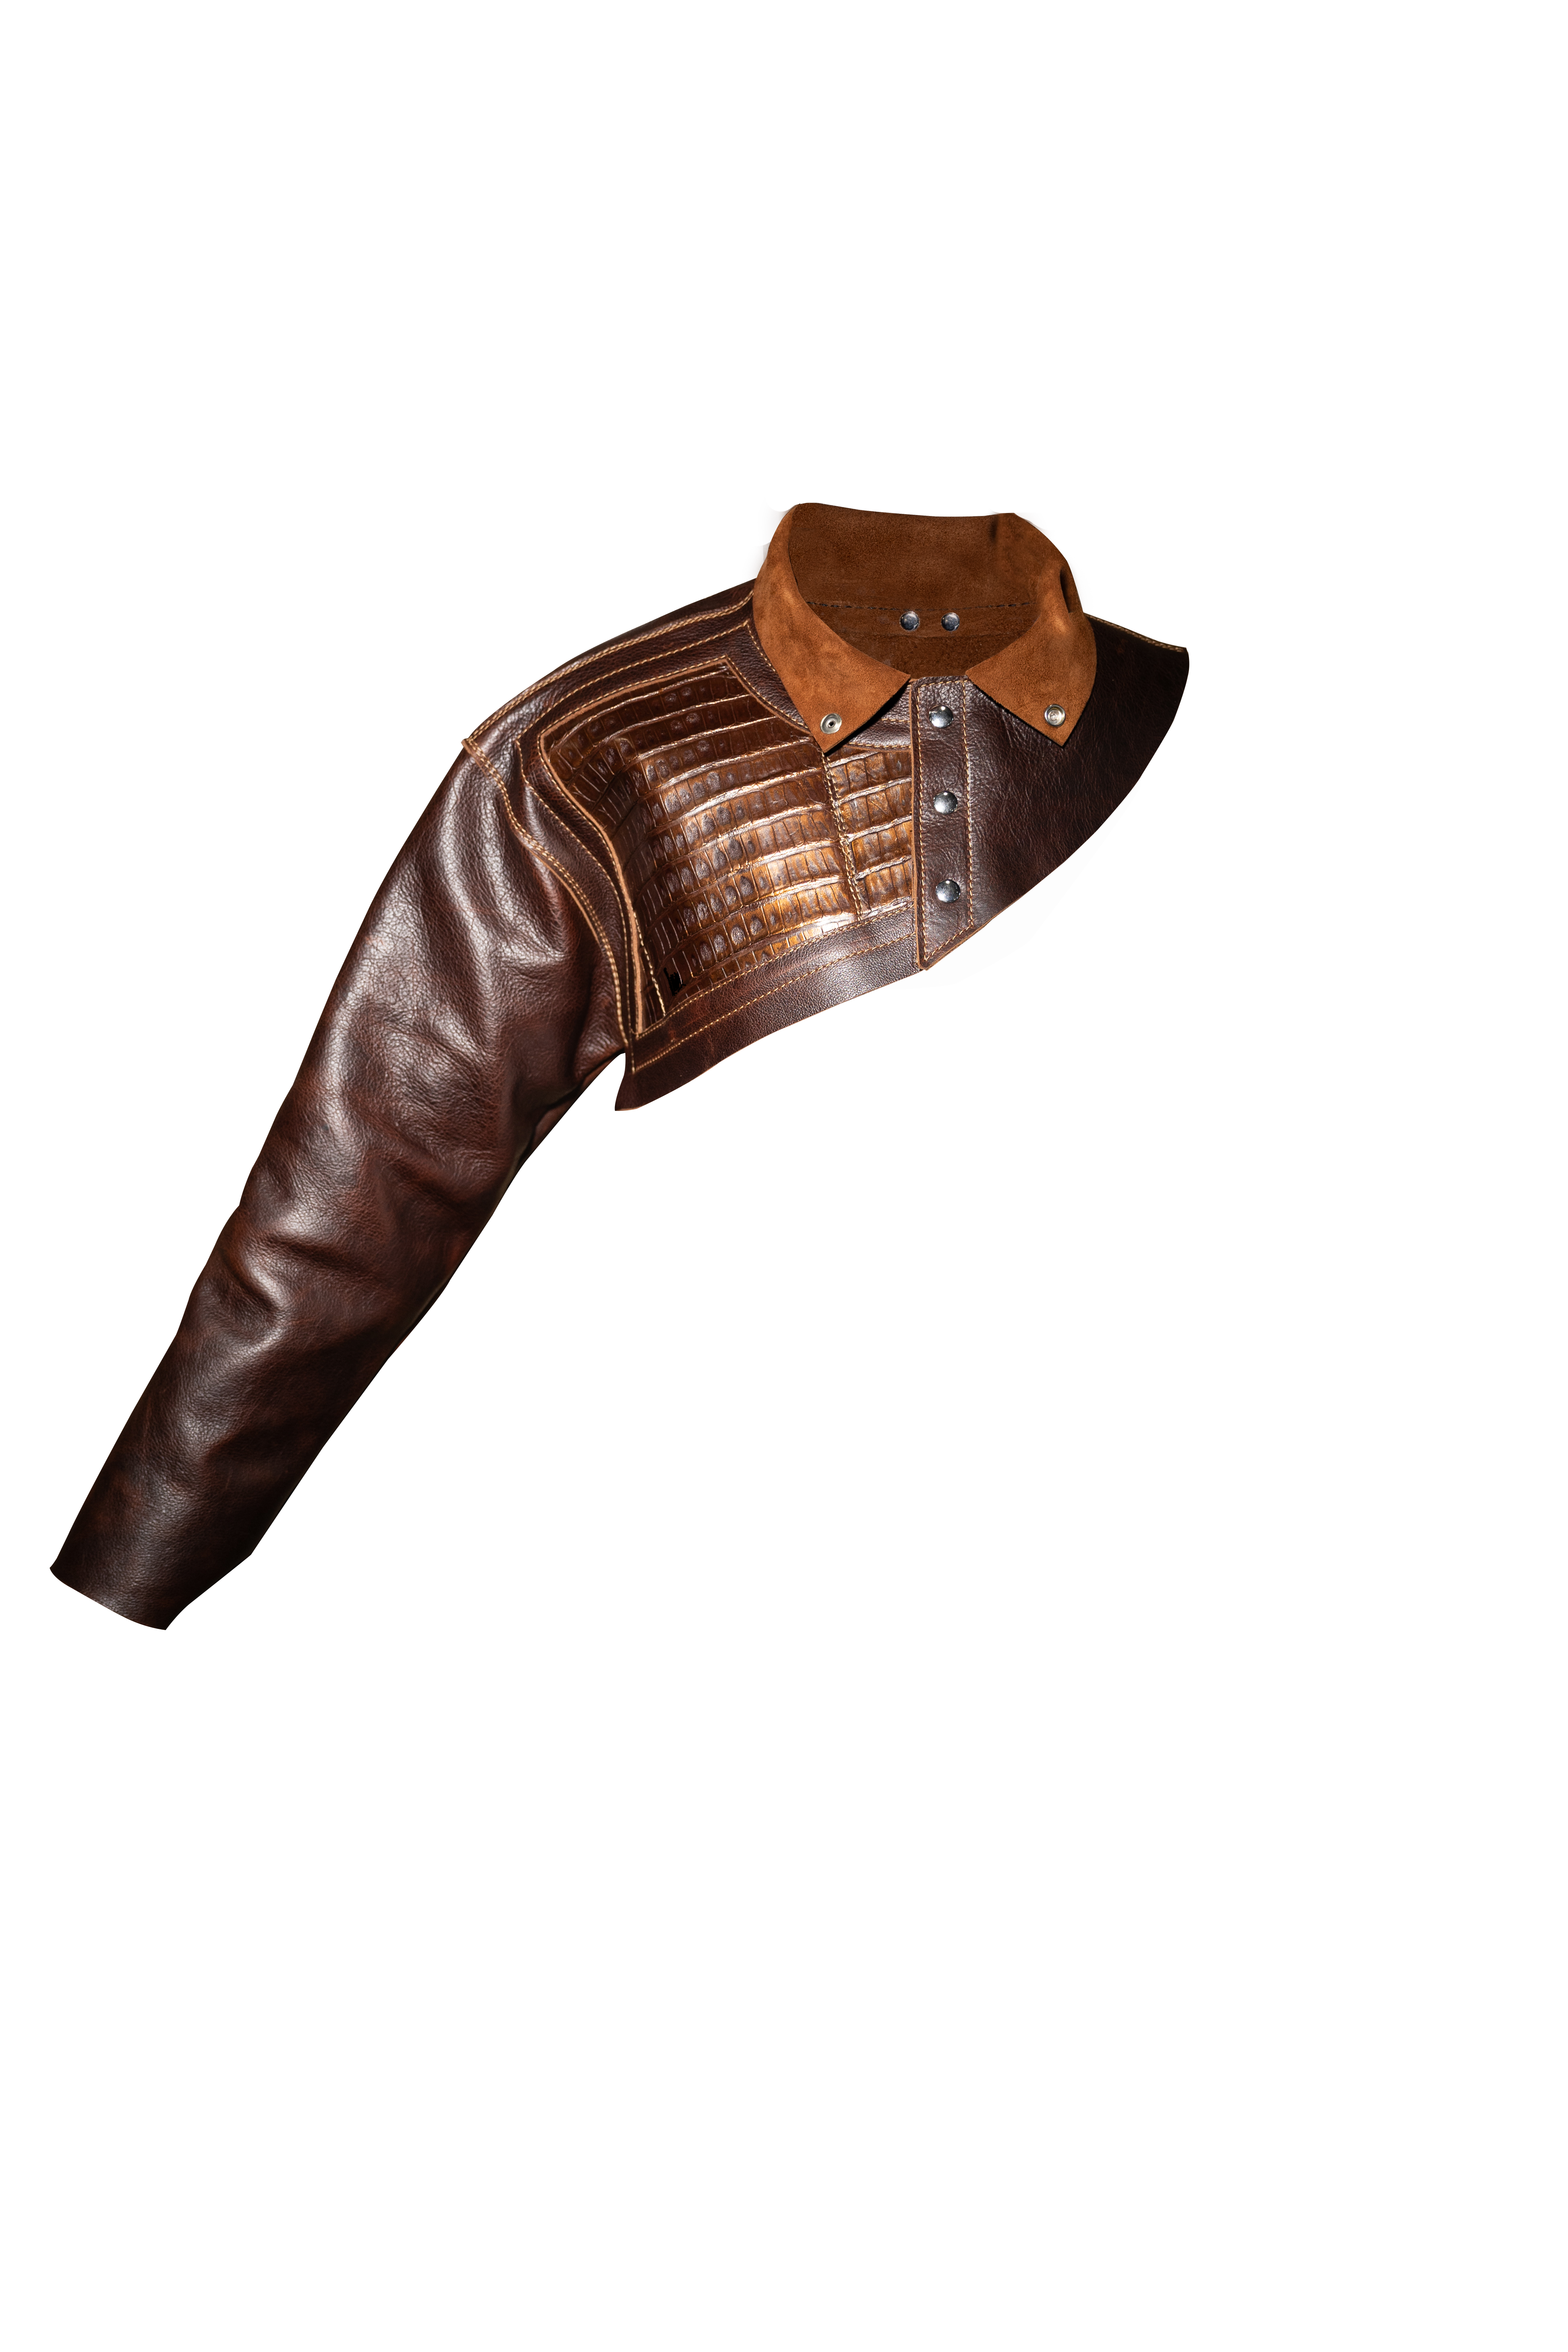 OUTLAW LEATHER - WELDING JACKET - ONE SLEEVE LEATHER JACKETS - CAIMAN